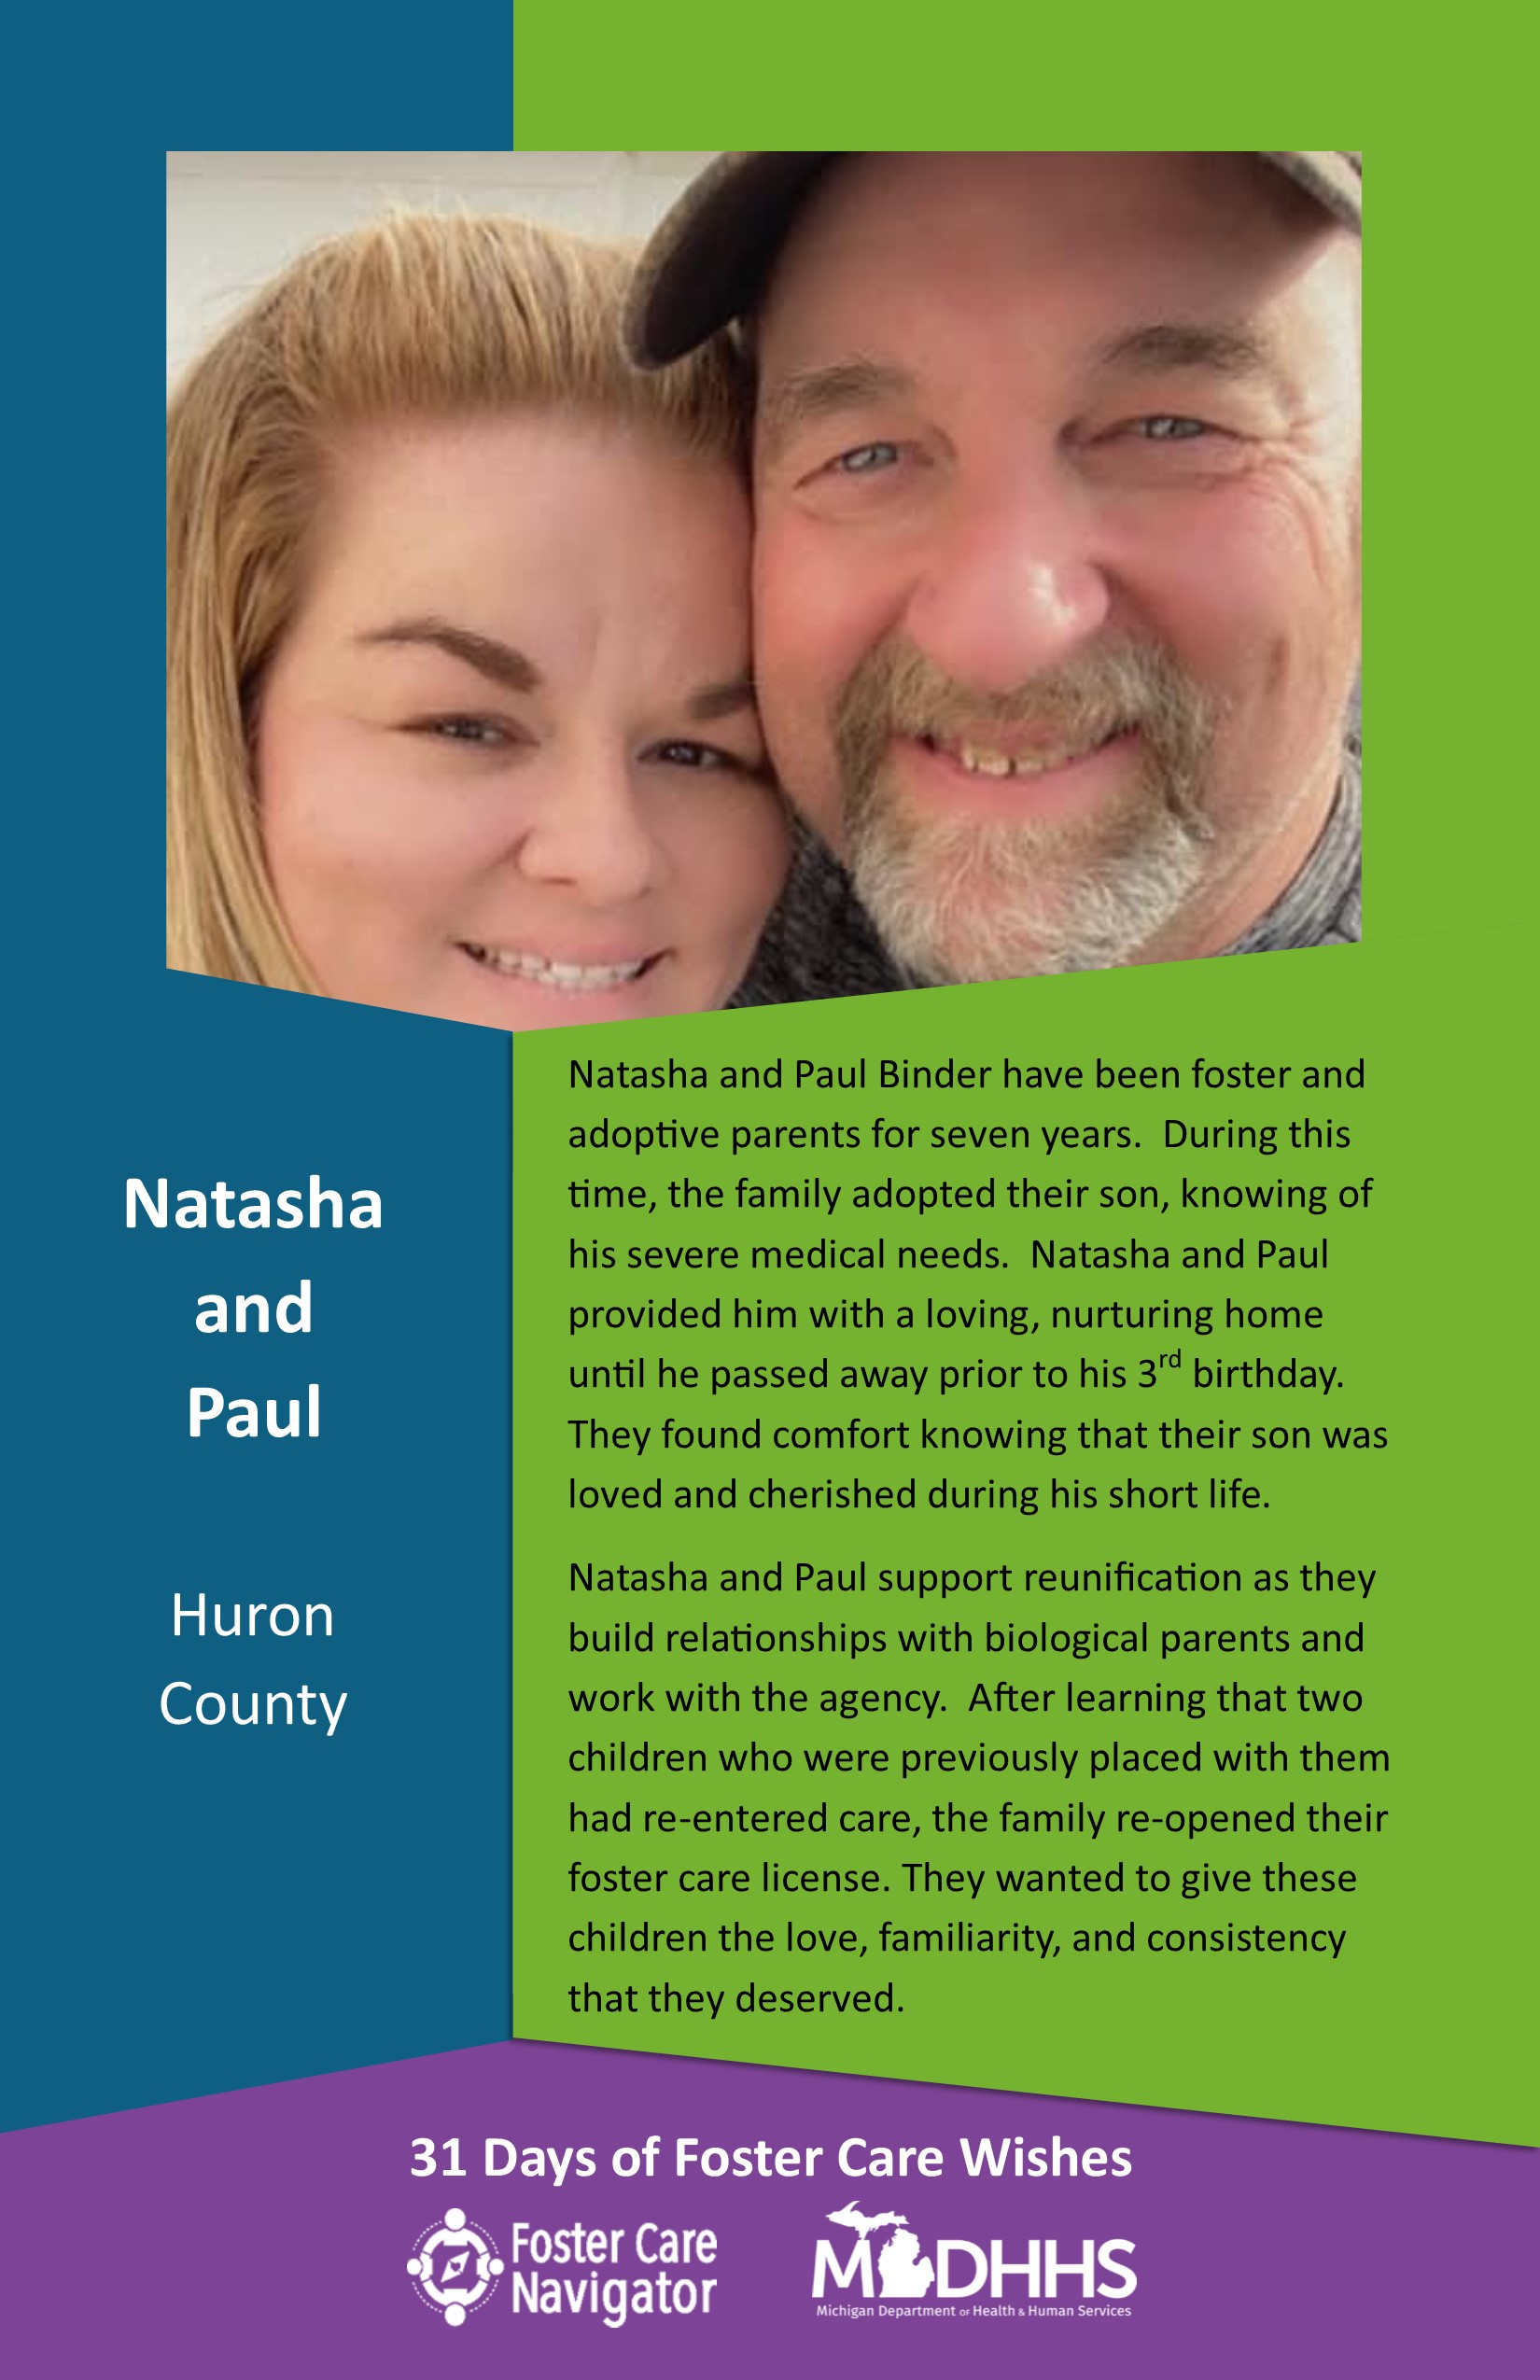 This full page feature includes all of the text listed in the body of this blog post as well as a photo of Natasha and Paul. The background is blue on the left, green on the right, and purple at the bottom of the page where the logos are located.